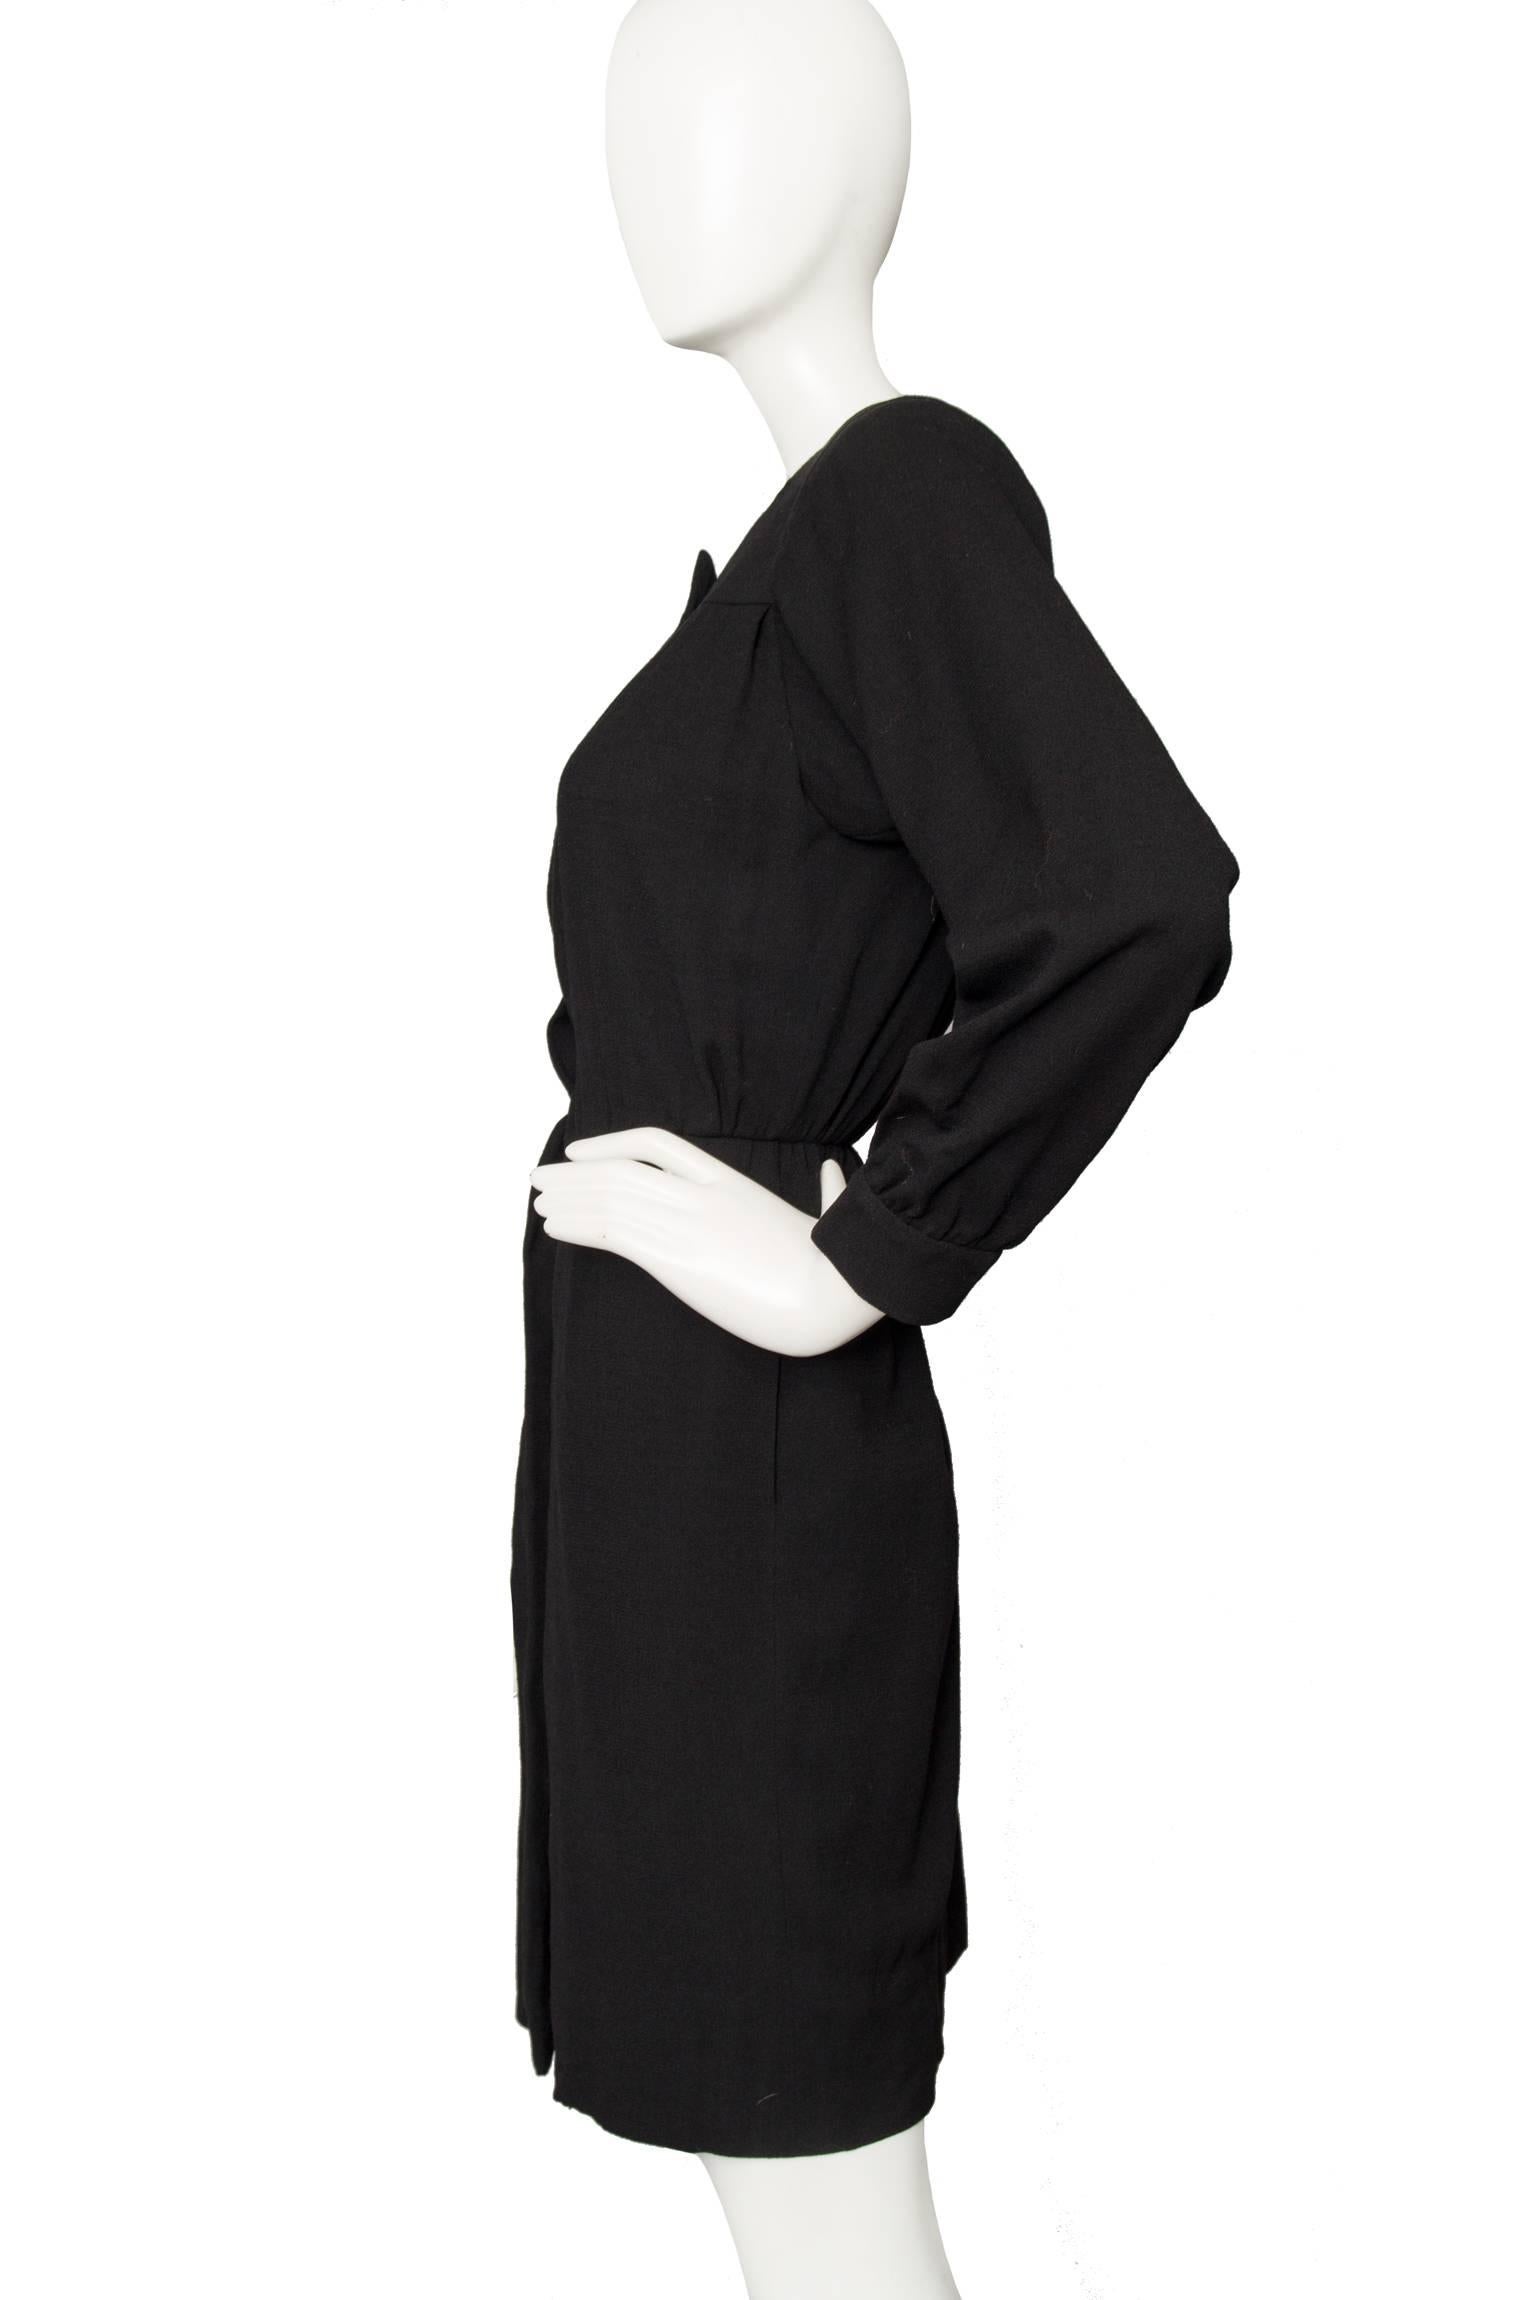 A black 1980s Yves Saint Laurent wool dress with a hidden front button closure, a large visible button at the top and long sleeves with fitted cuffs. The dress has a nipped in waist and slightly puffed shoulders with shoulder pads. 

The size of